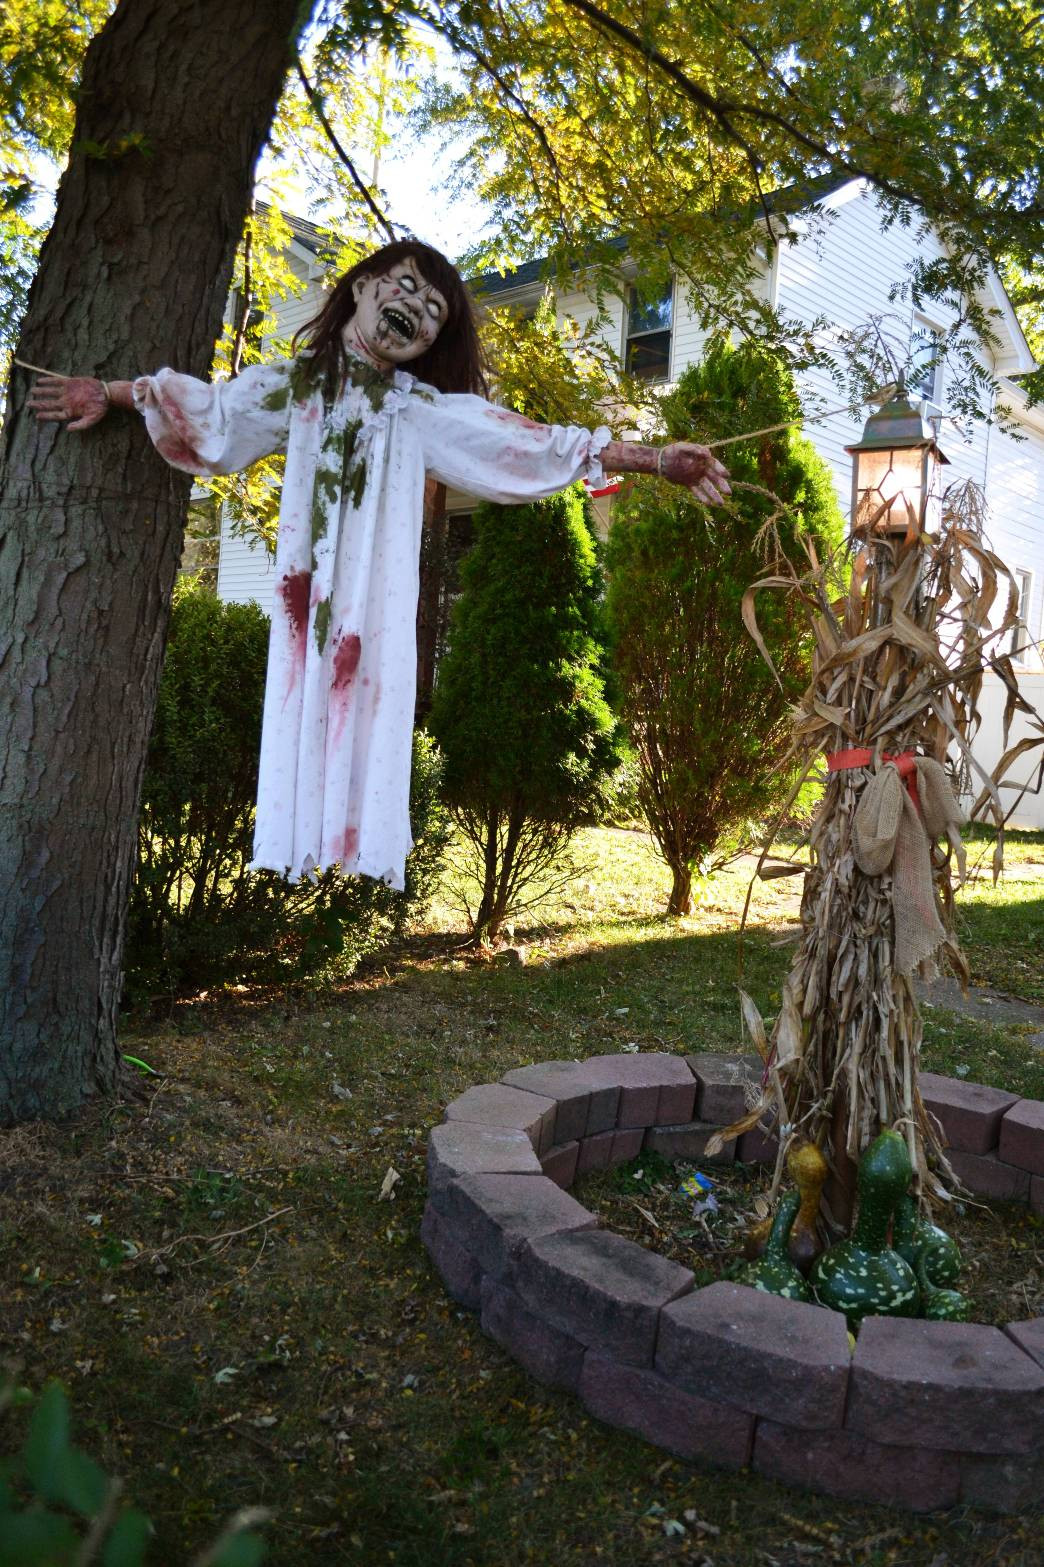 Ideas For Halloween Party In Backyard
 35 Best Ideas For Halloween Decorations Yard With 3 Easy Tips